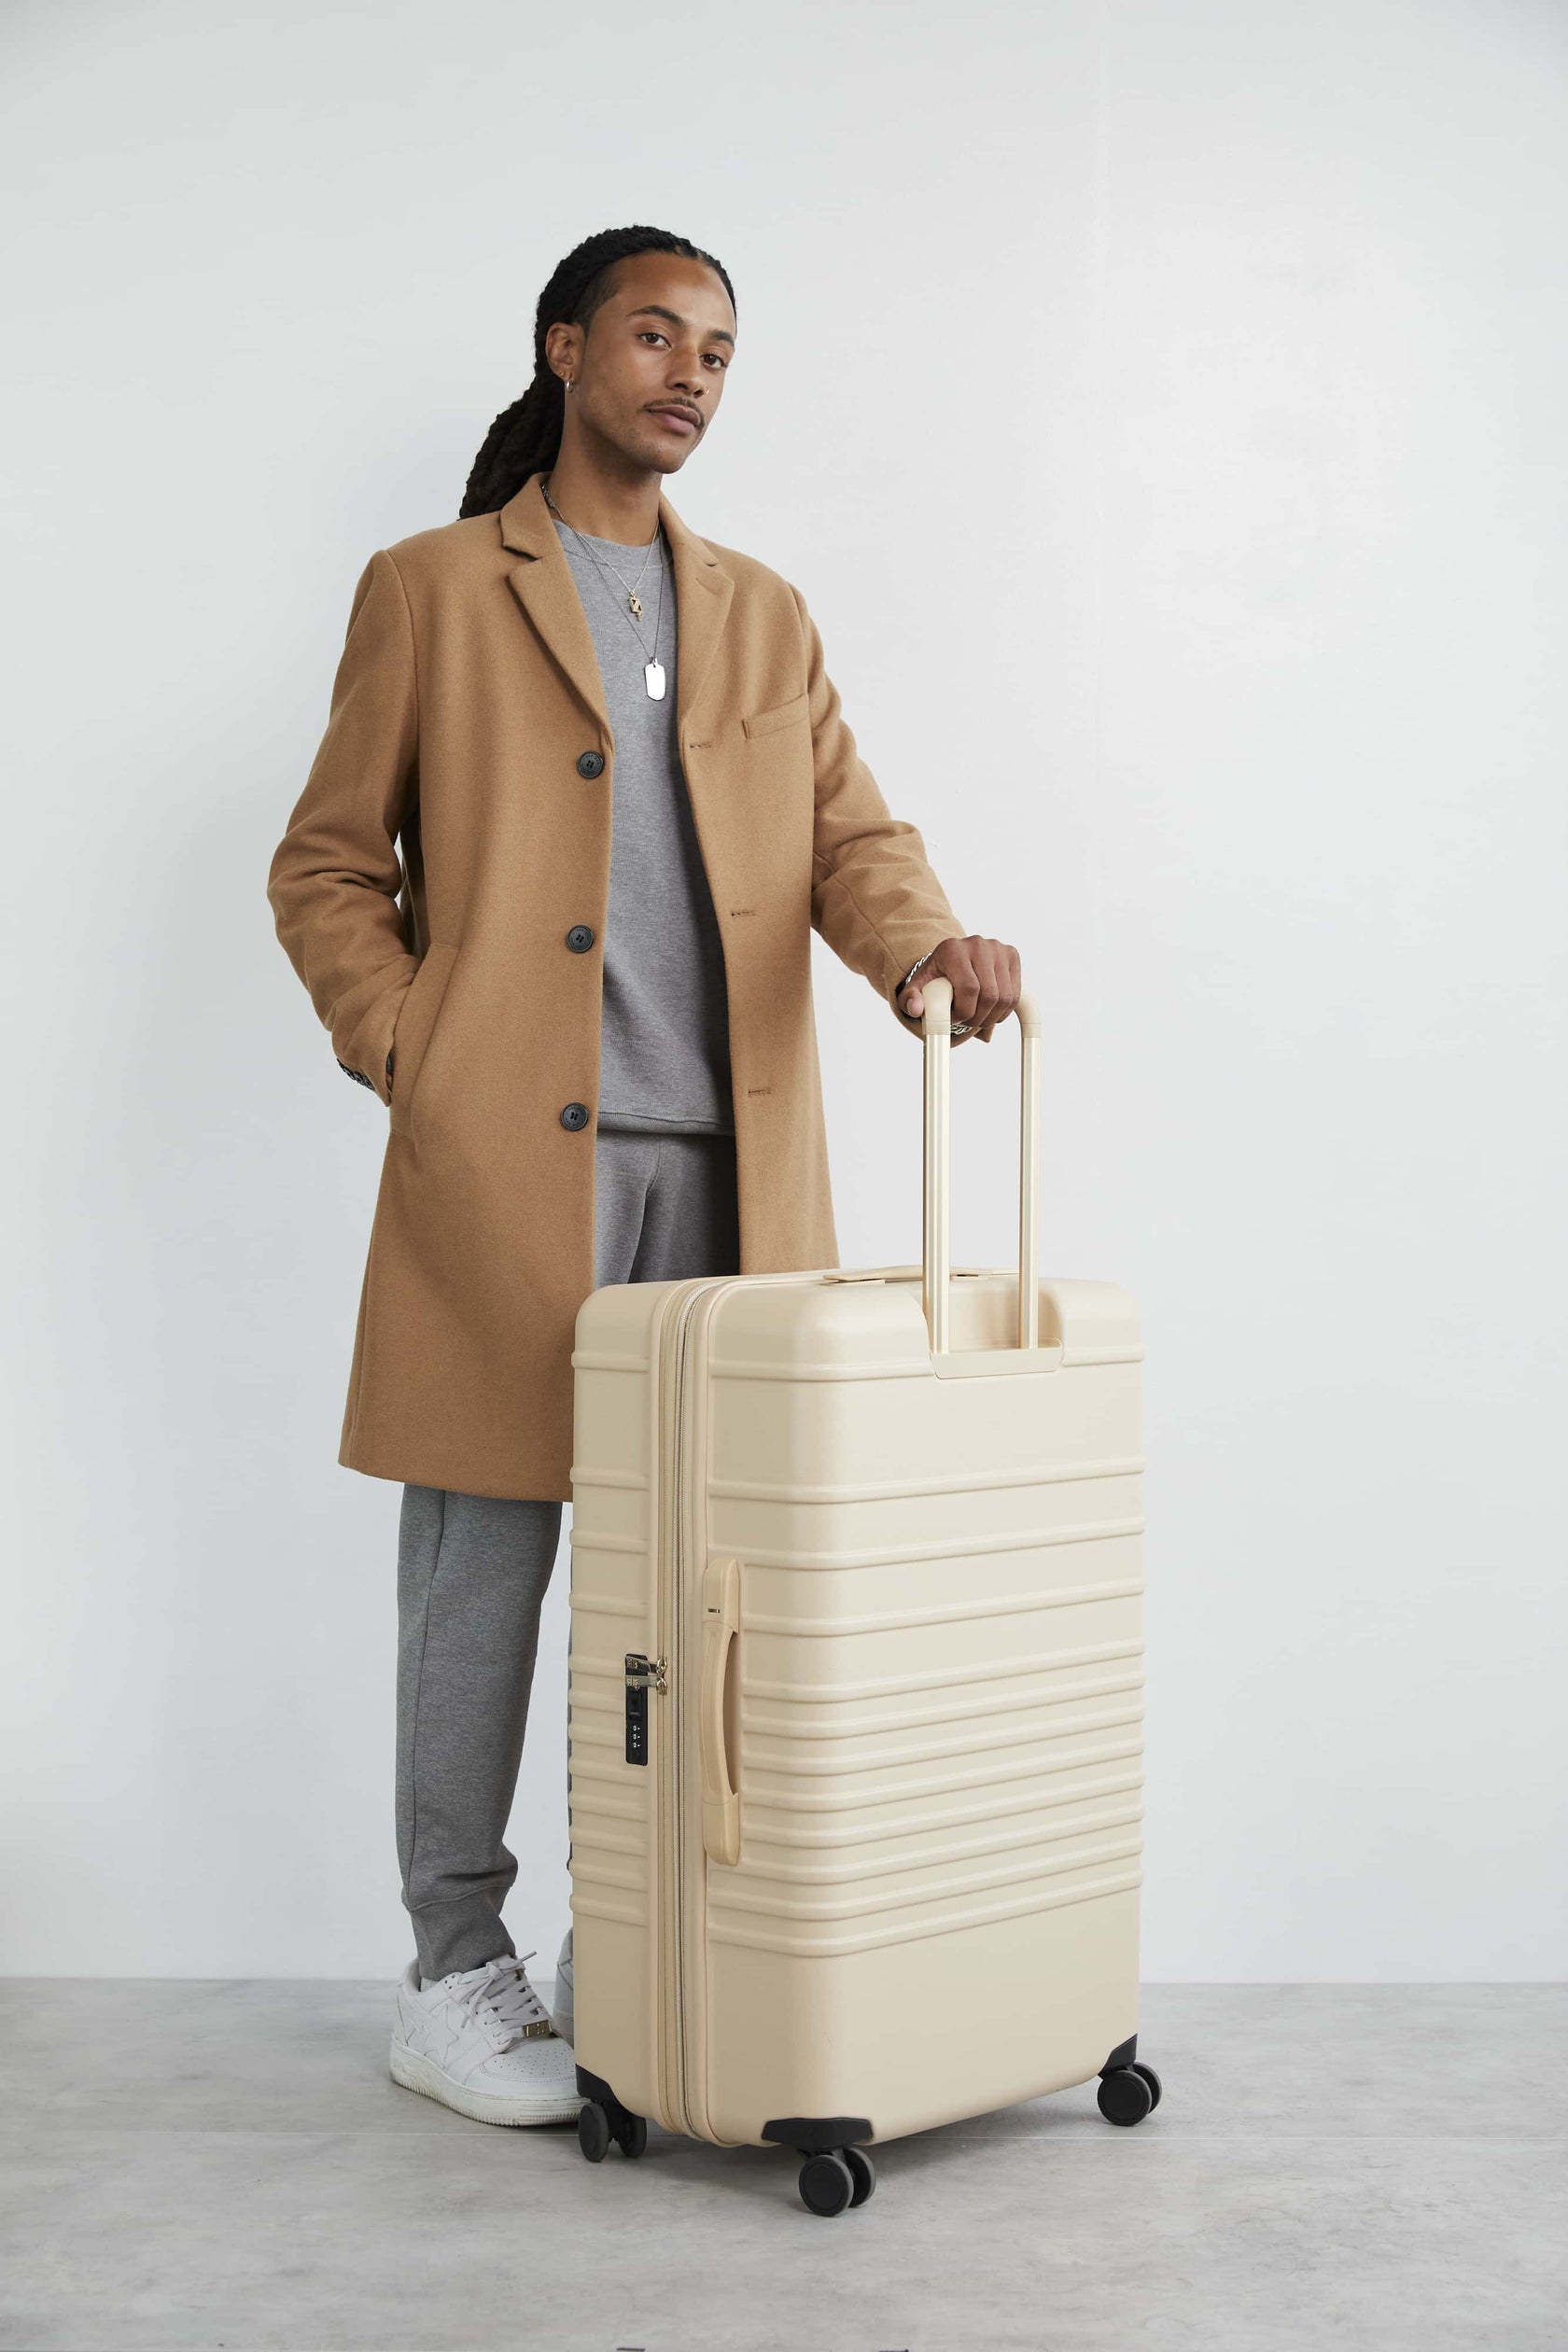 The Check-In Roller in Beige